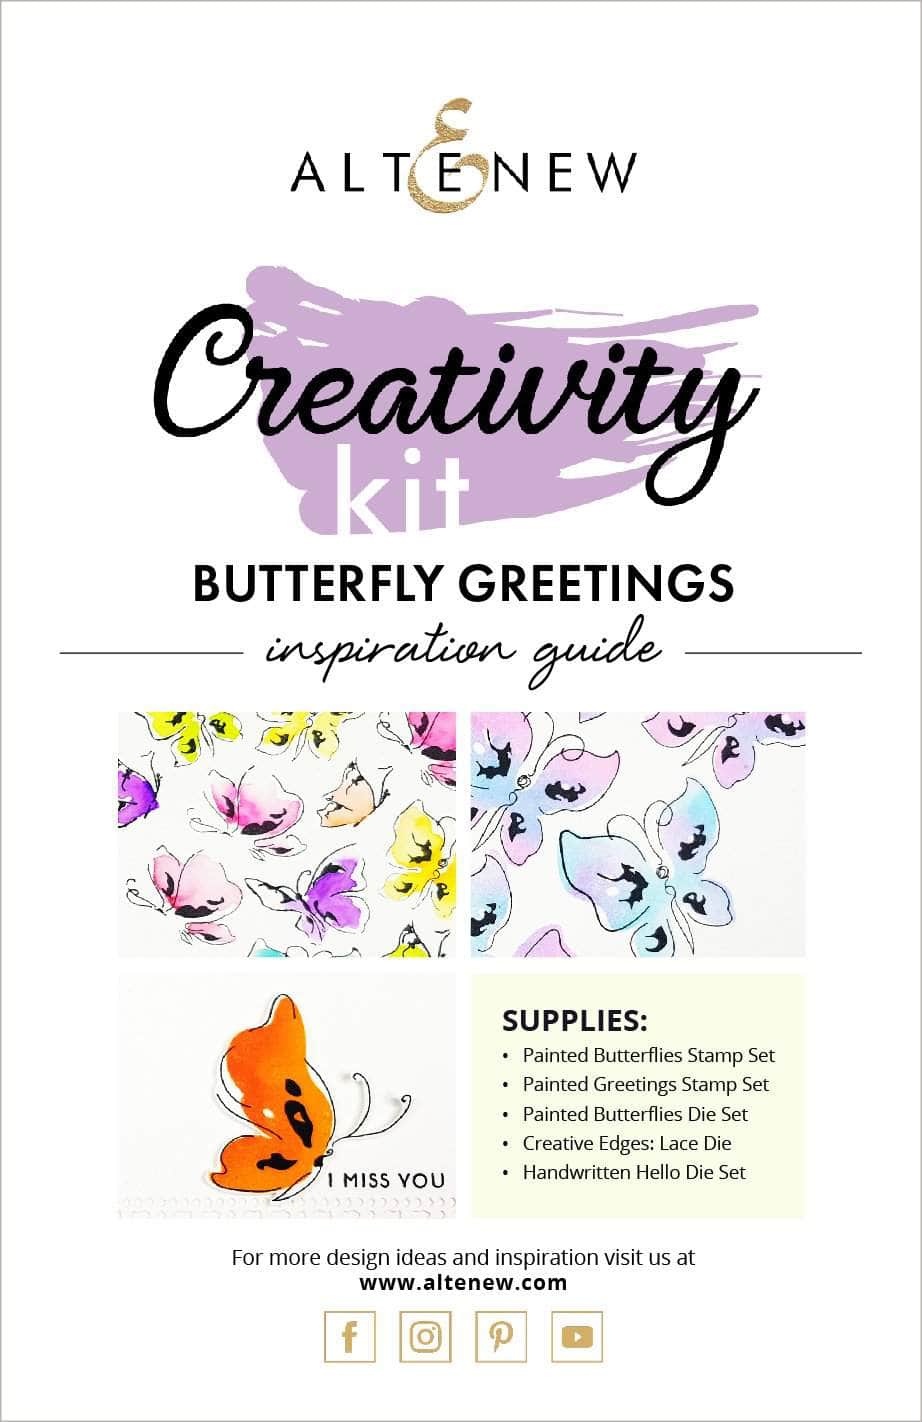 Printed Media Butterfly Greetings Creativity Kit Inspiration Guide